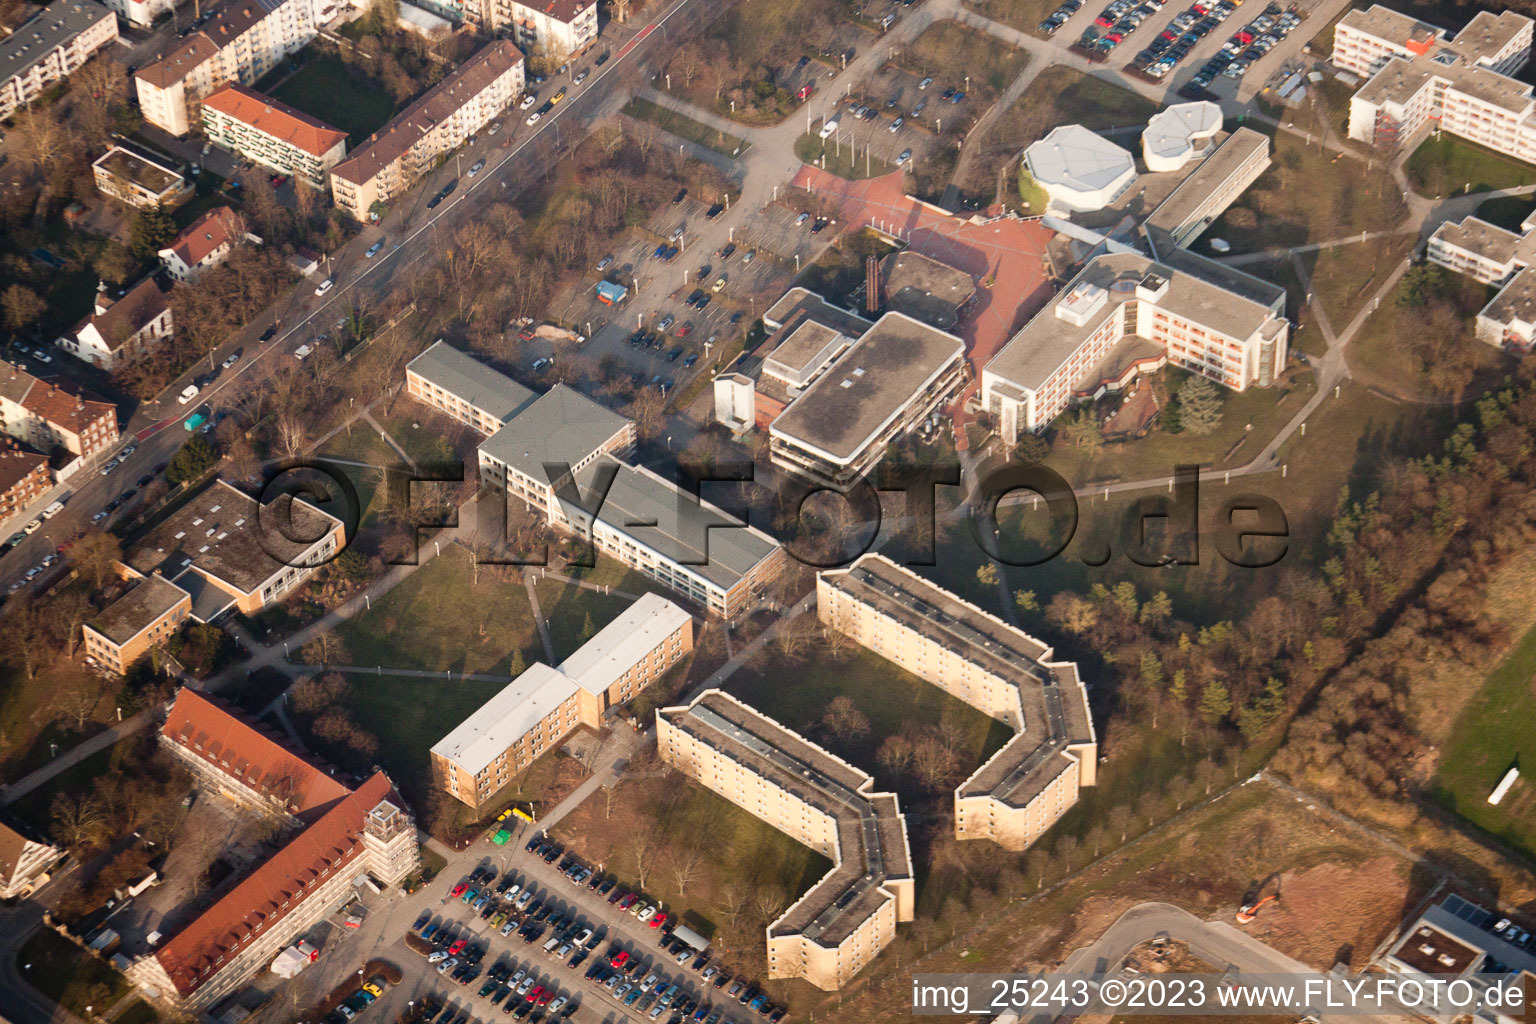 Oblique view of Bundeswehr training center in the district Neuostheim in Mannheim in the state Baden-Wuerttemberg, Germany